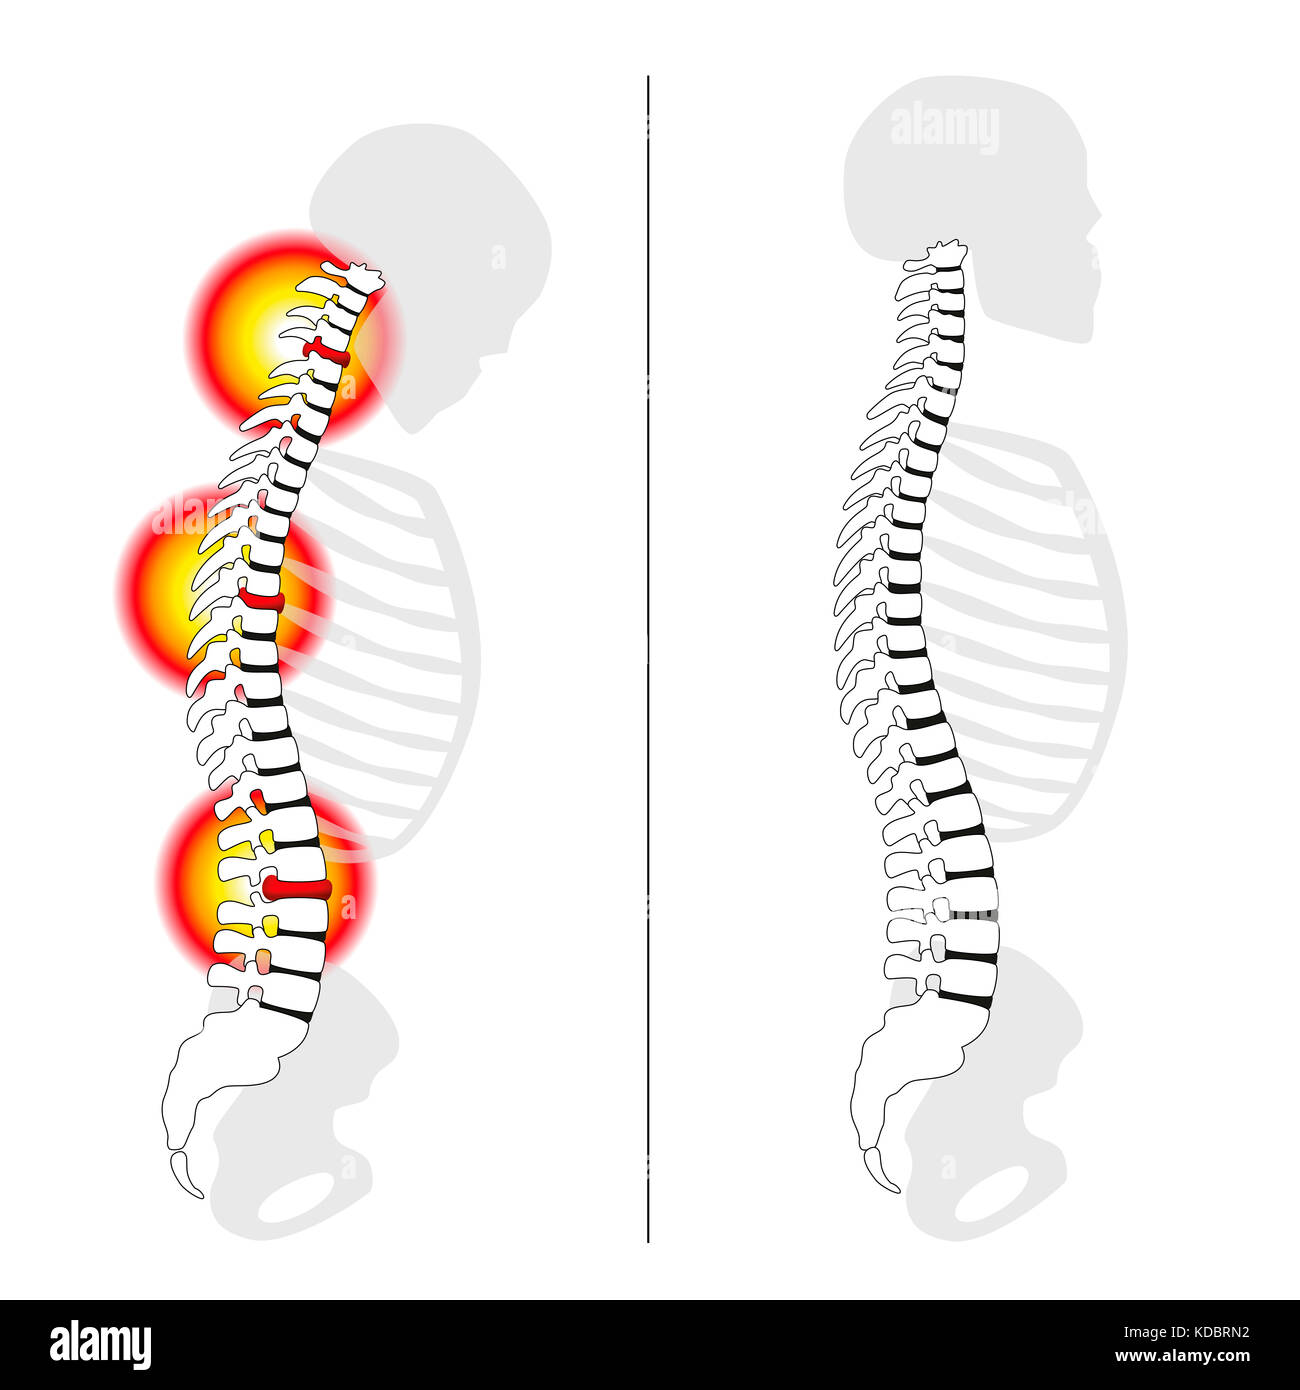 Slipped disc prolapses, curved back, severe back pain - profile views of spinal disc herniation versus upright healthy back. Stock Photo